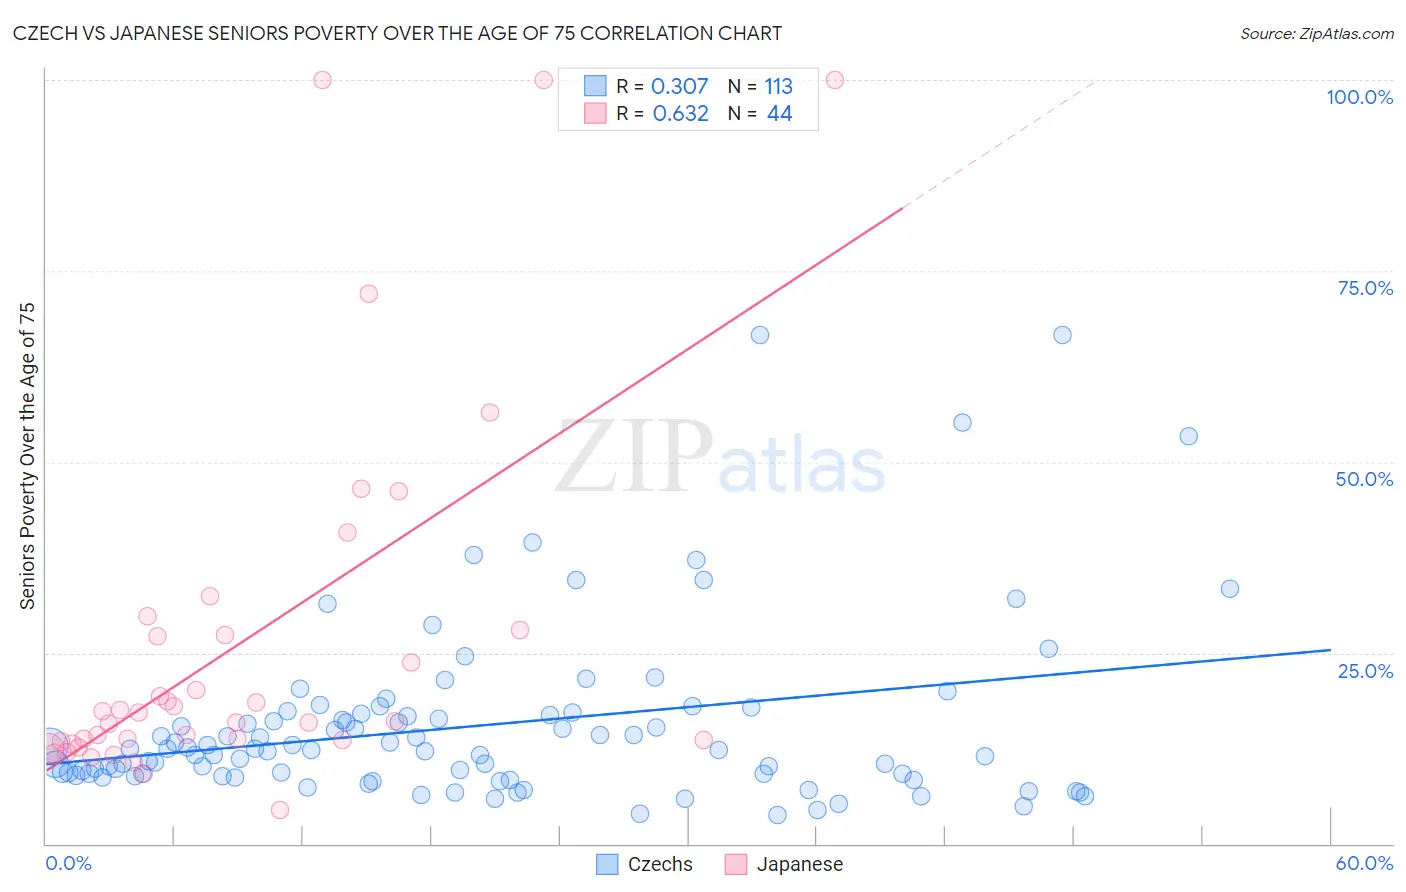 Czech vs Japanese Seniors Poverty Over the Age of 75